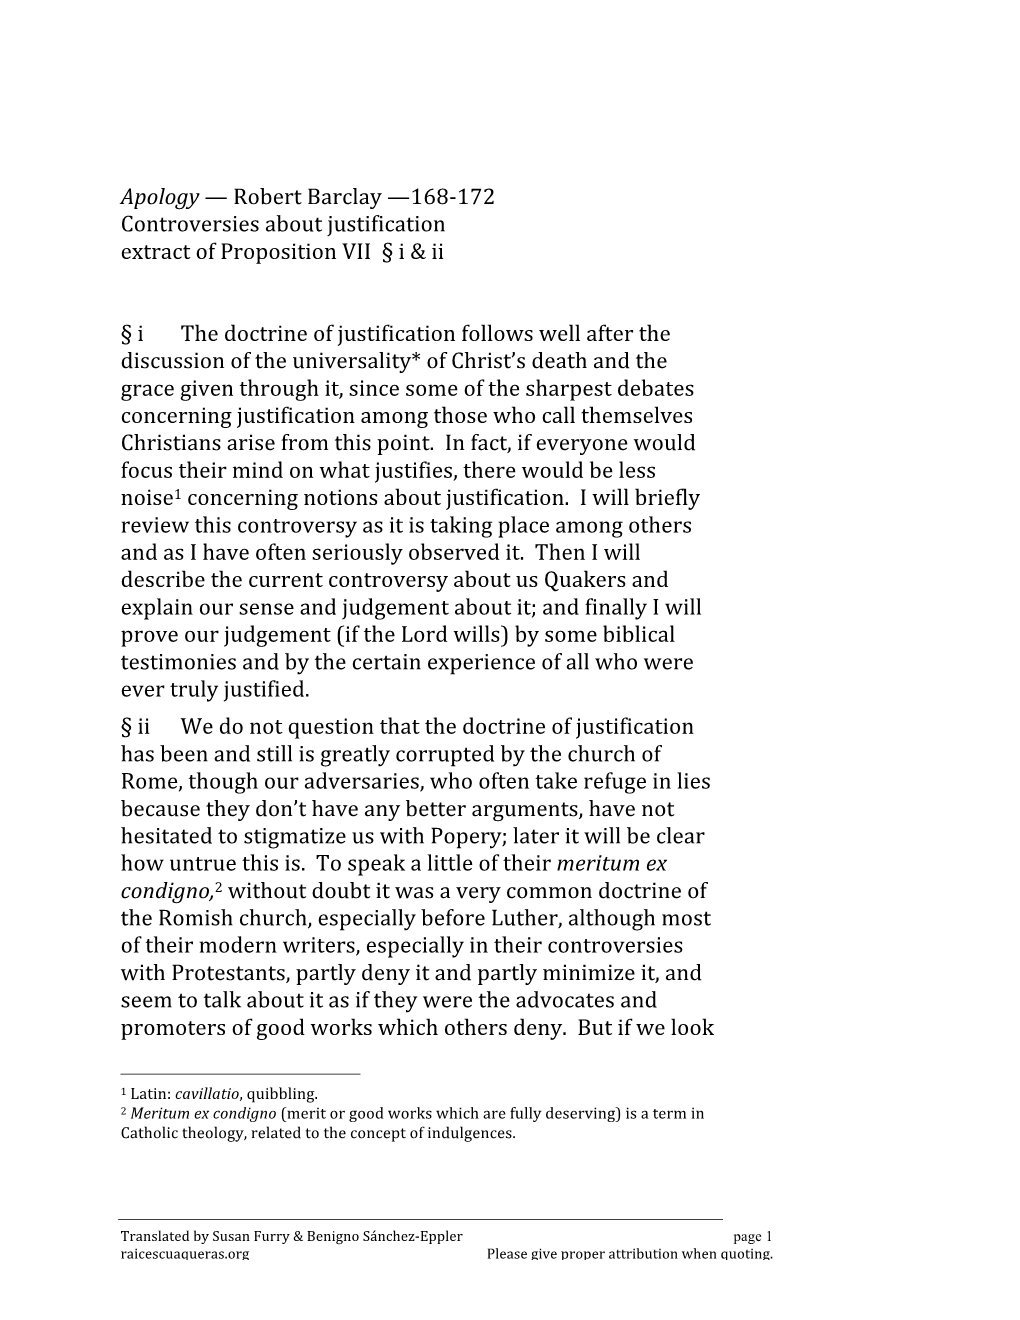 Apology — Robert Barclay —168-172 Controversies About Justification Extract of Proposition VII § I & Ii